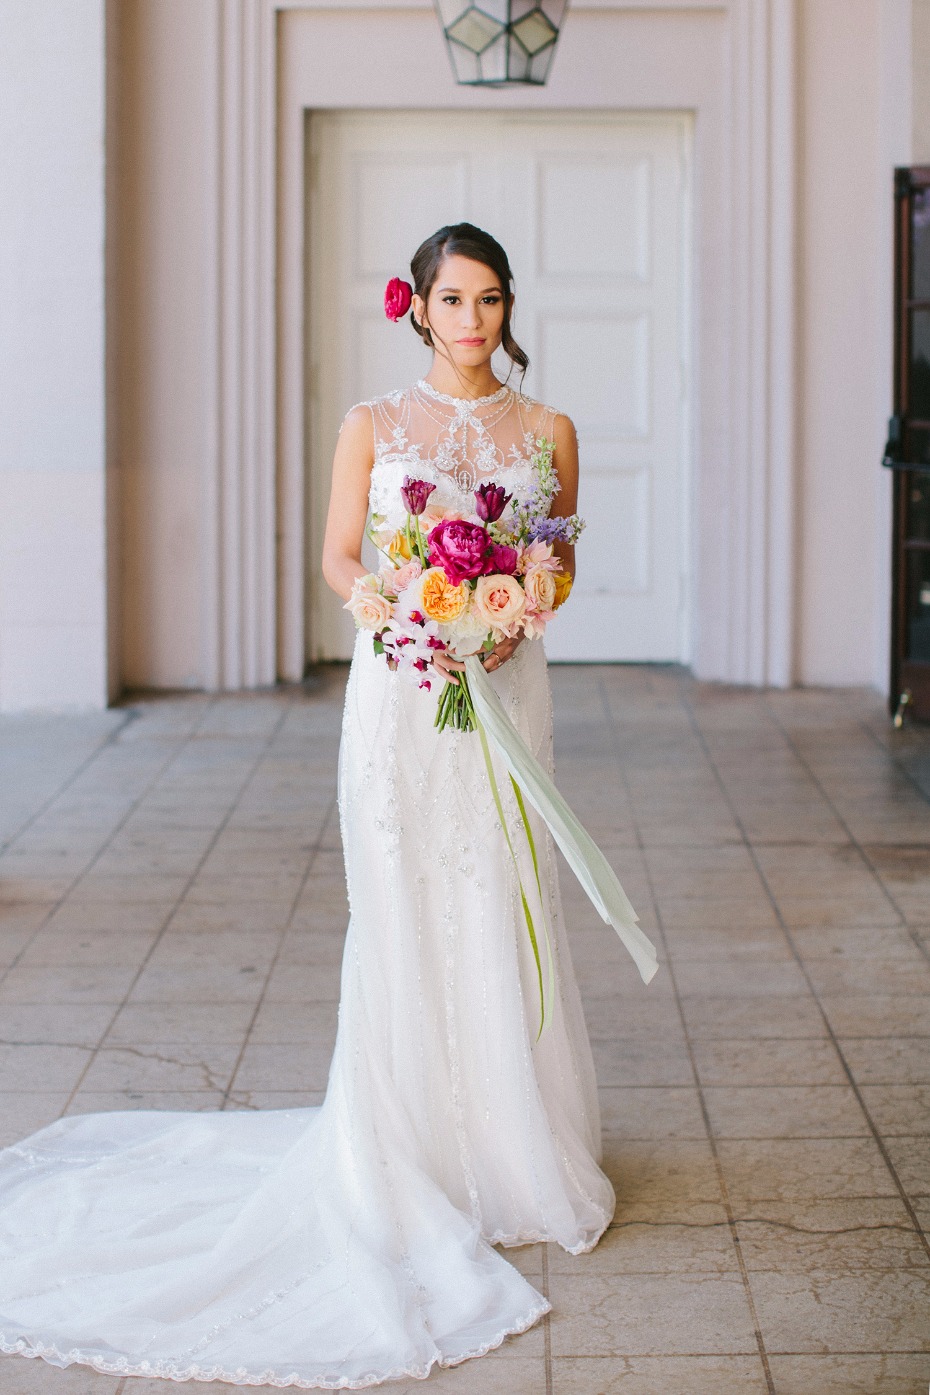 Gorgeous bridal look with a colorful bouquet